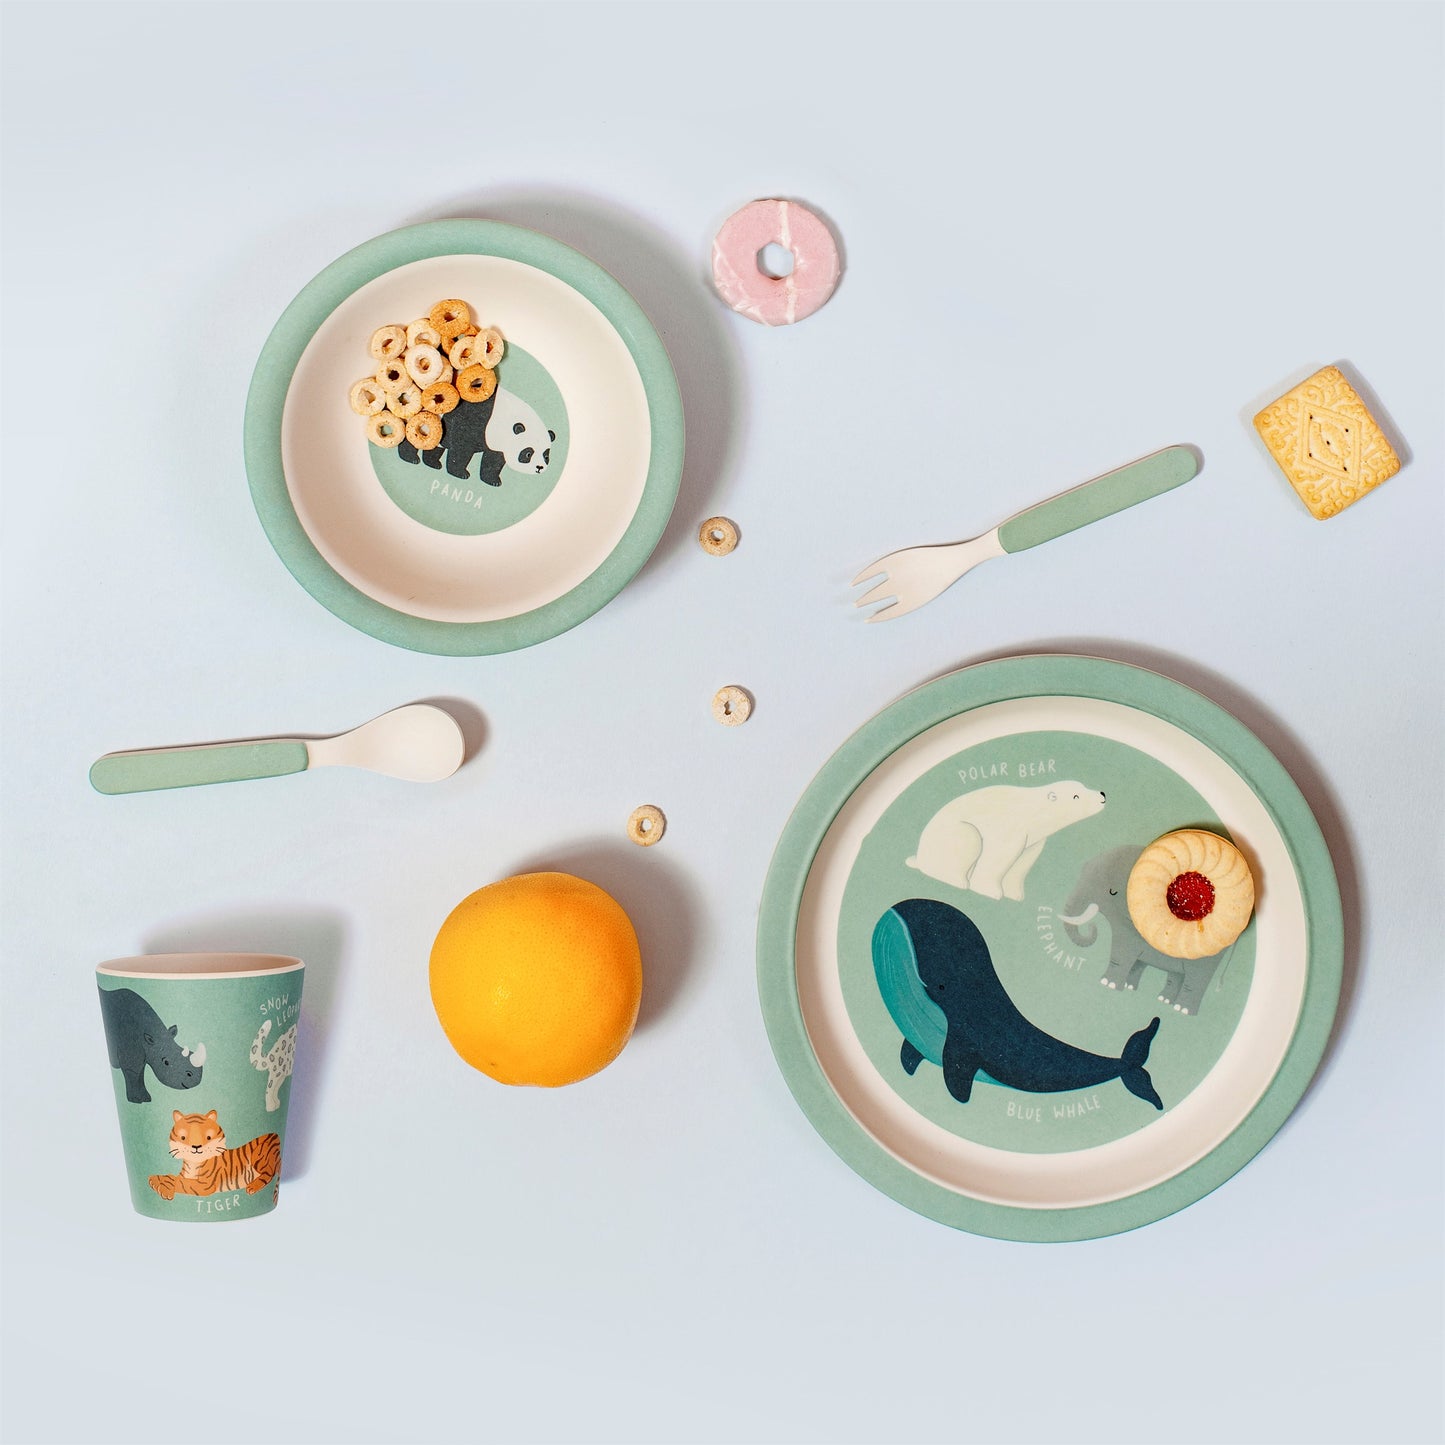 Love our animals with this bamboo tableware and cutlery set featuring a green/blue and white design with various endangered animals.